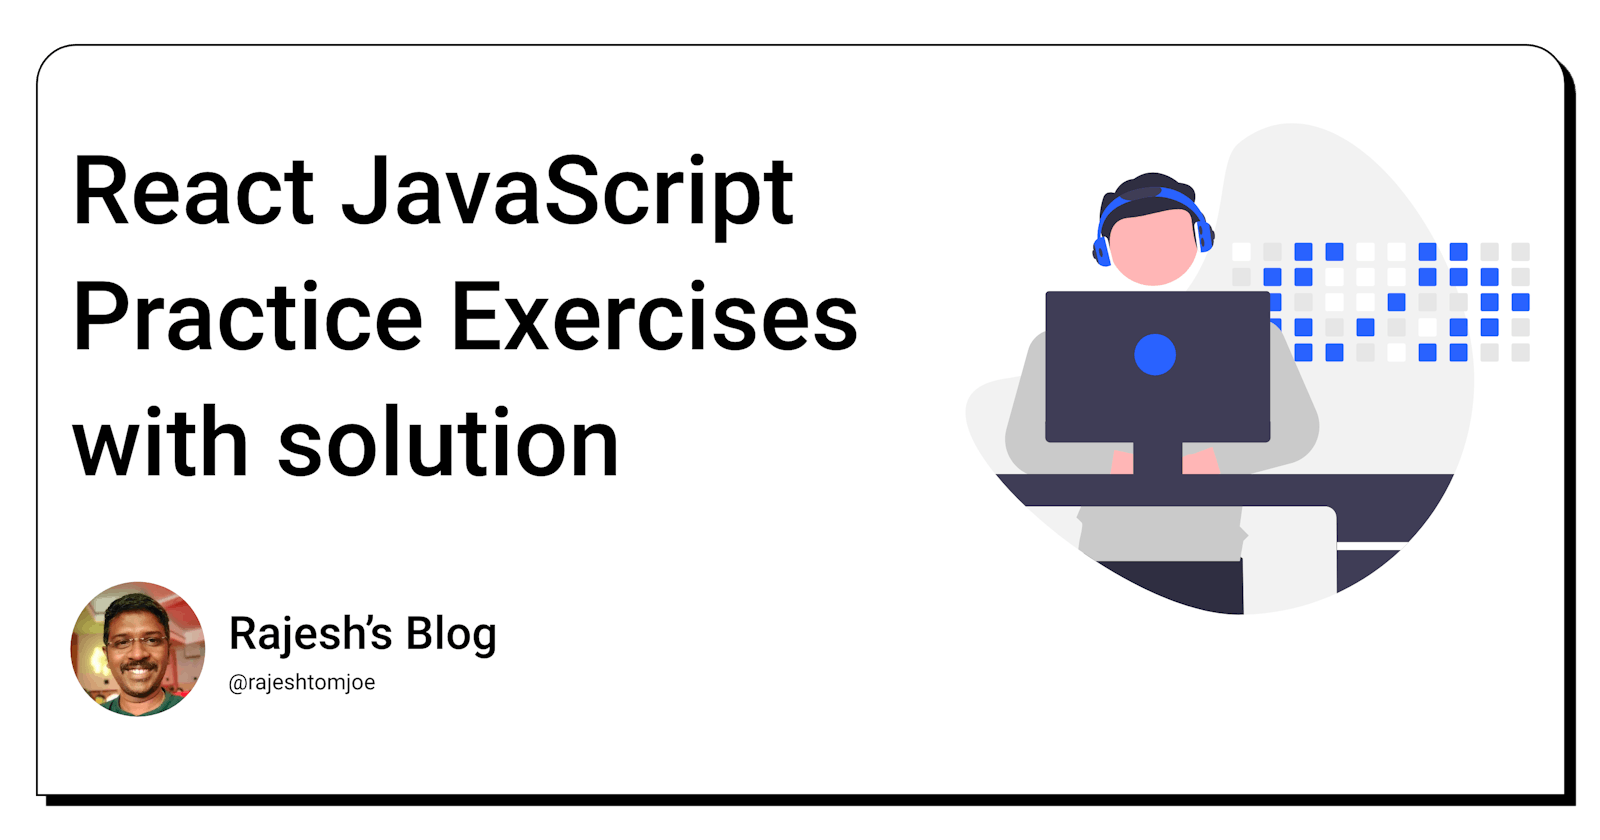 25 React JavaScript Practice Exercises with solution